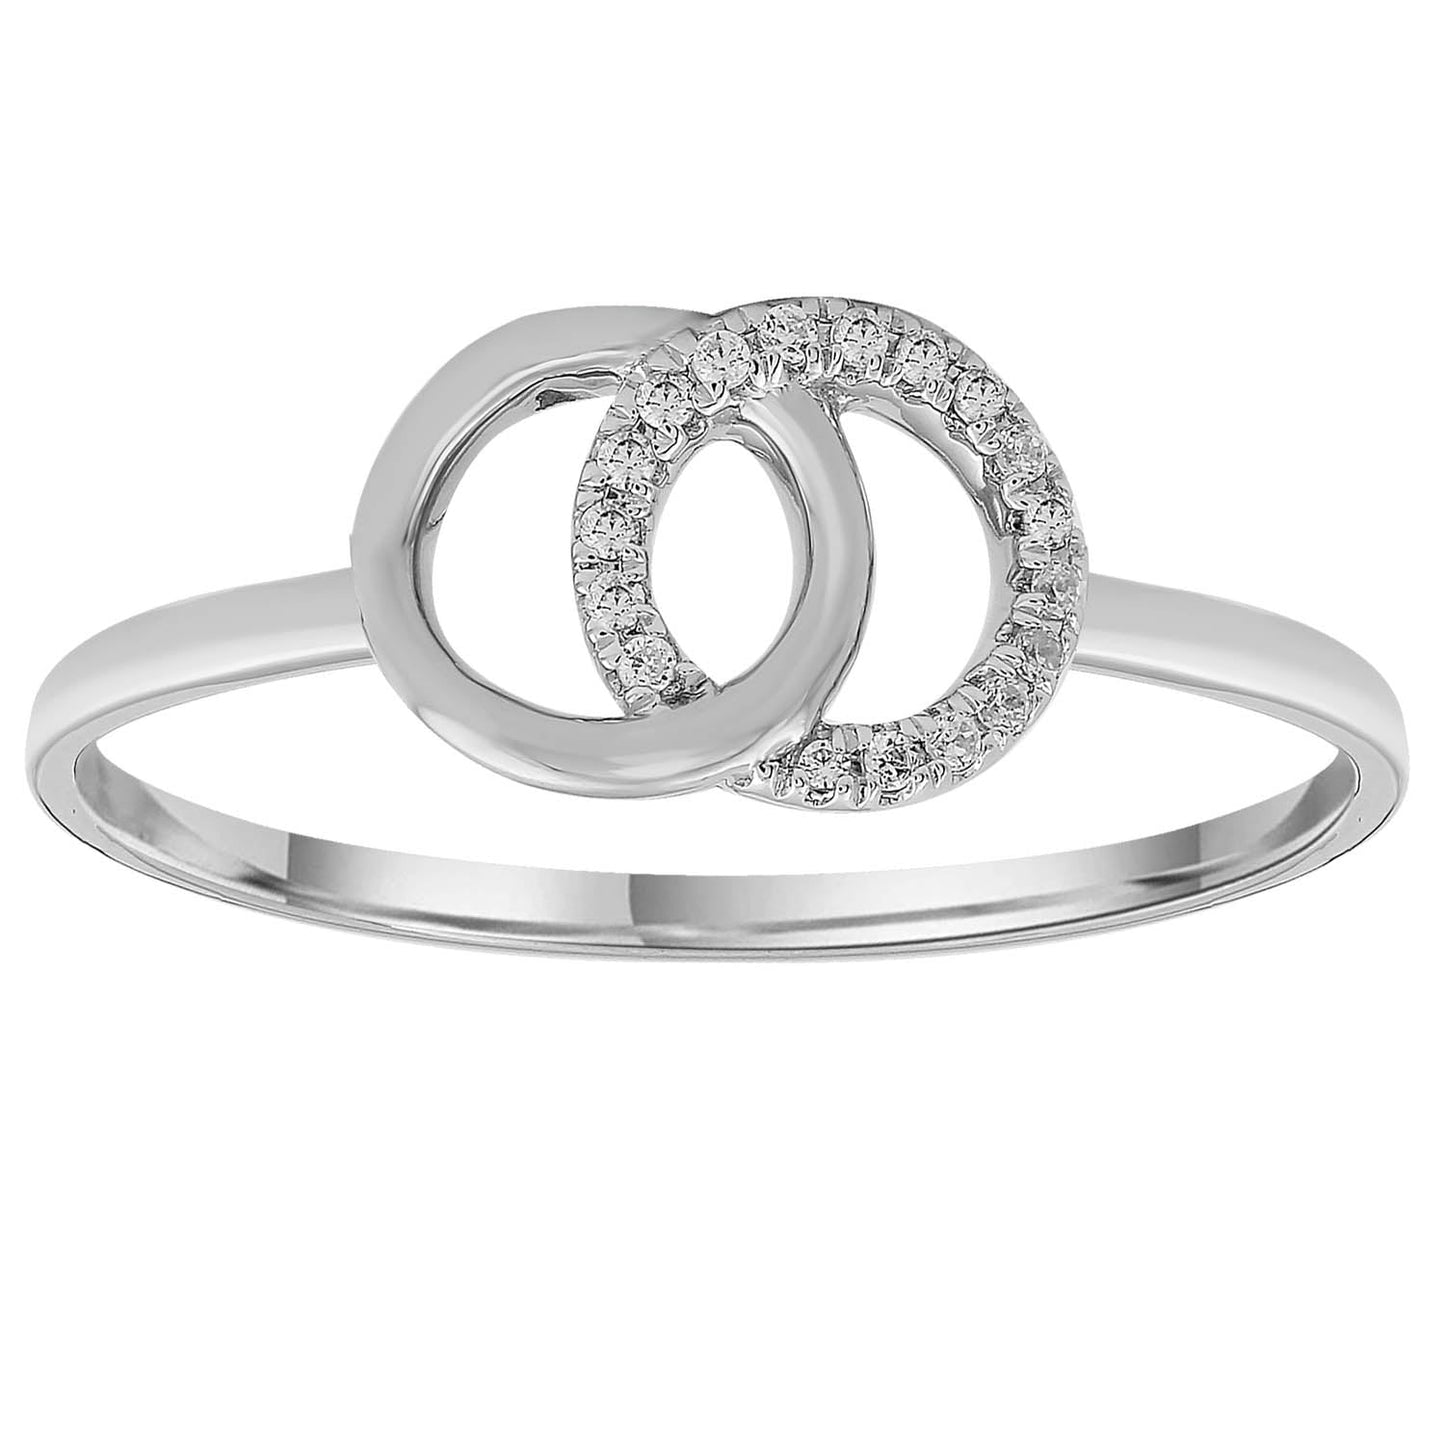 Linked Circle Ring with 0.05ct Diamonds in 9K White Gold